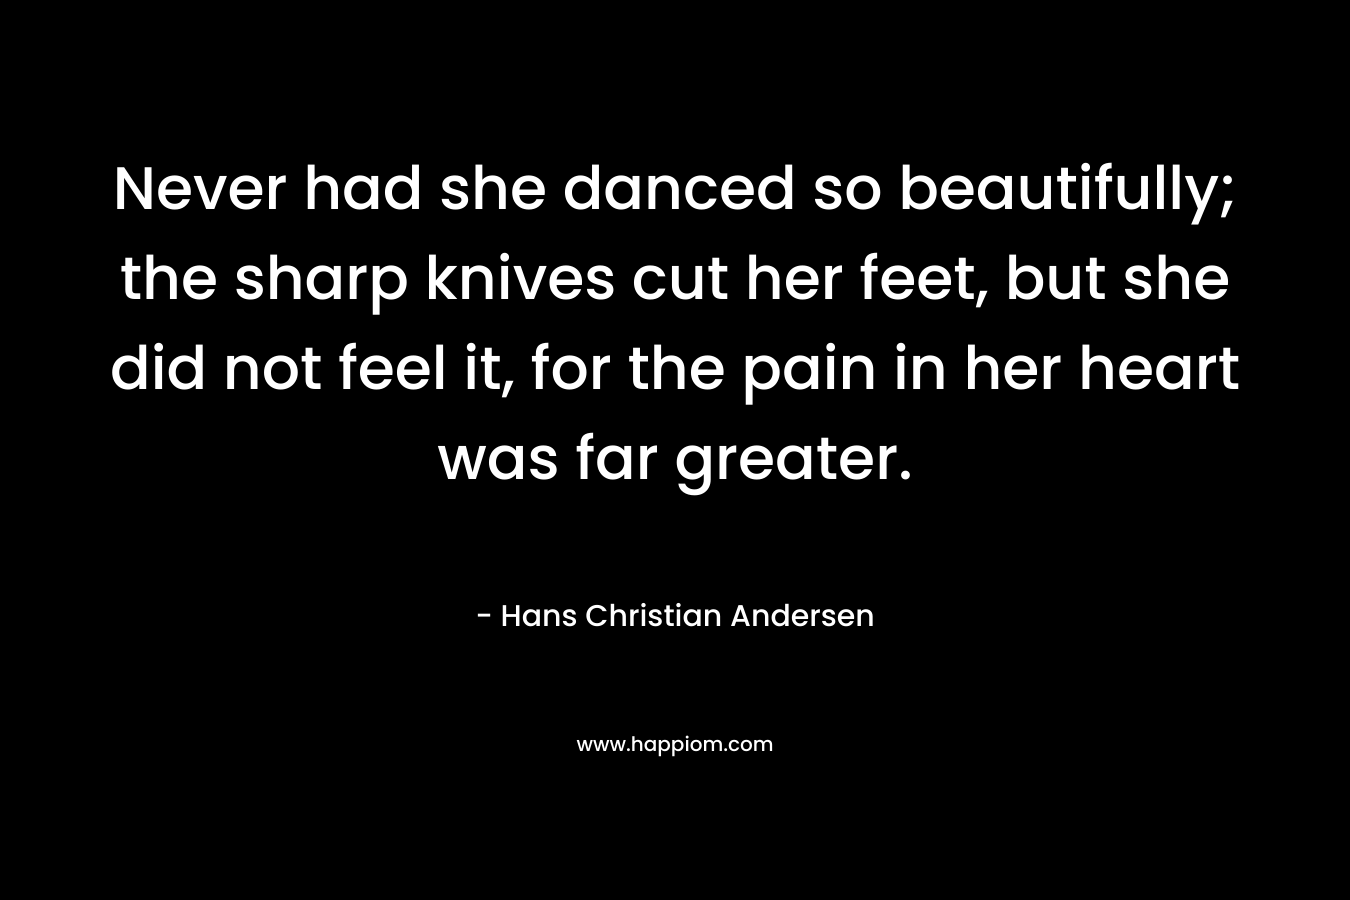 Never had she danced so beautifully; the sharp knives cut her feet, but she did not feel it, for the pain in her heart was far greater. – Hans Christian Andersen